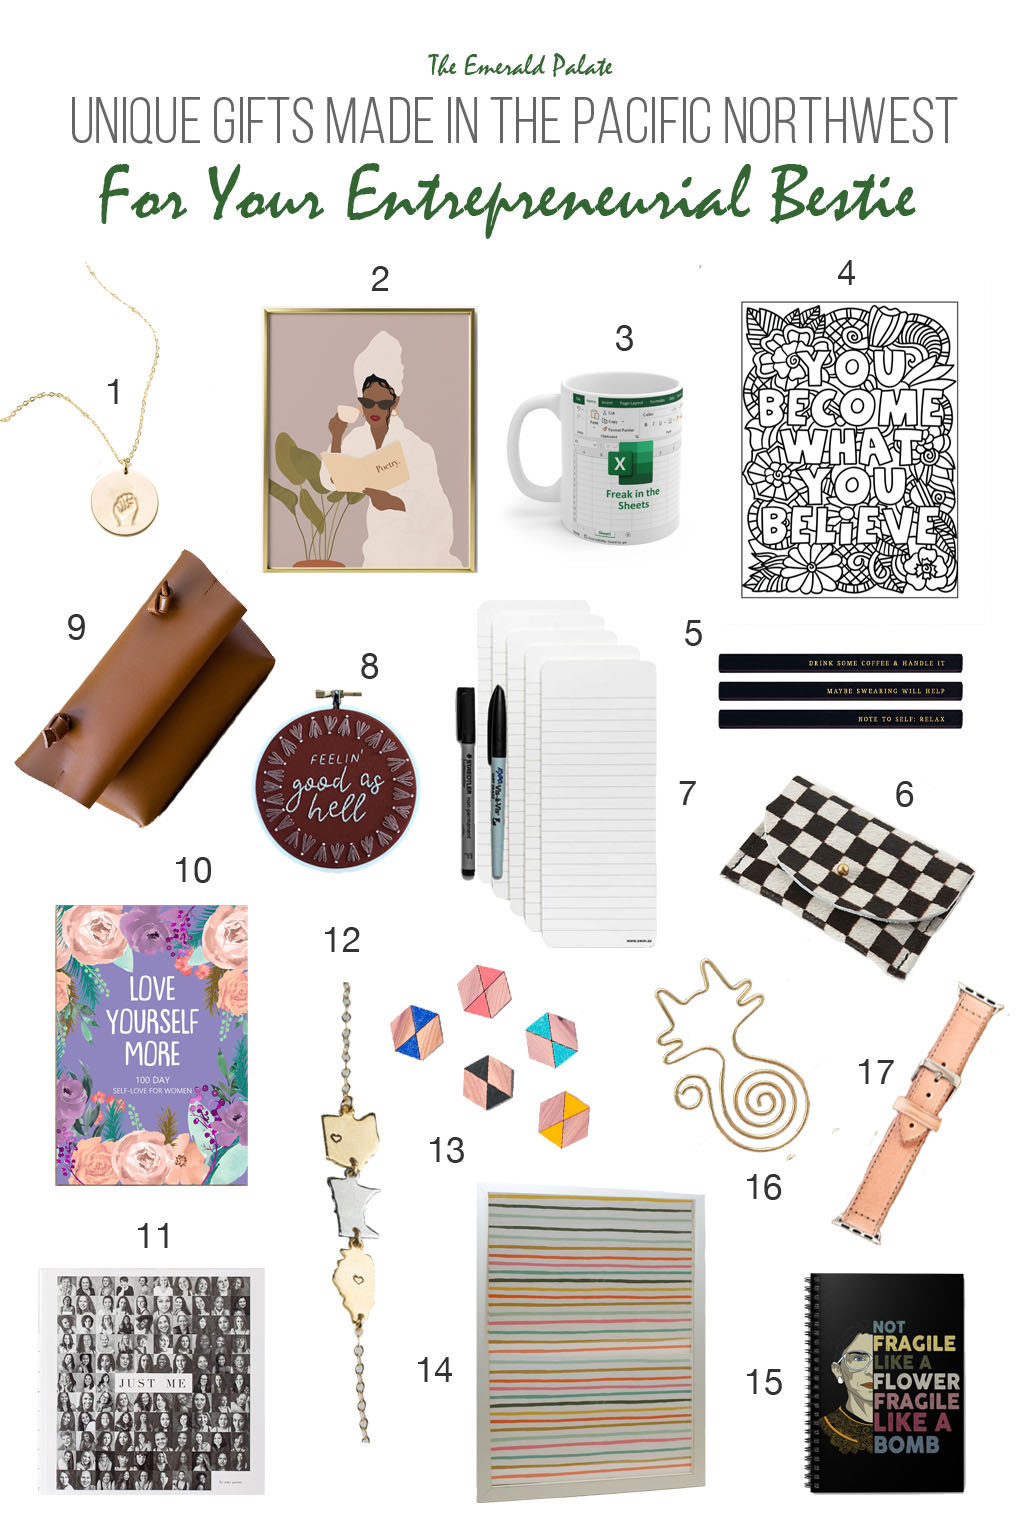 A collection of Pacific Northwest gifts for the entrepreneurial bestie